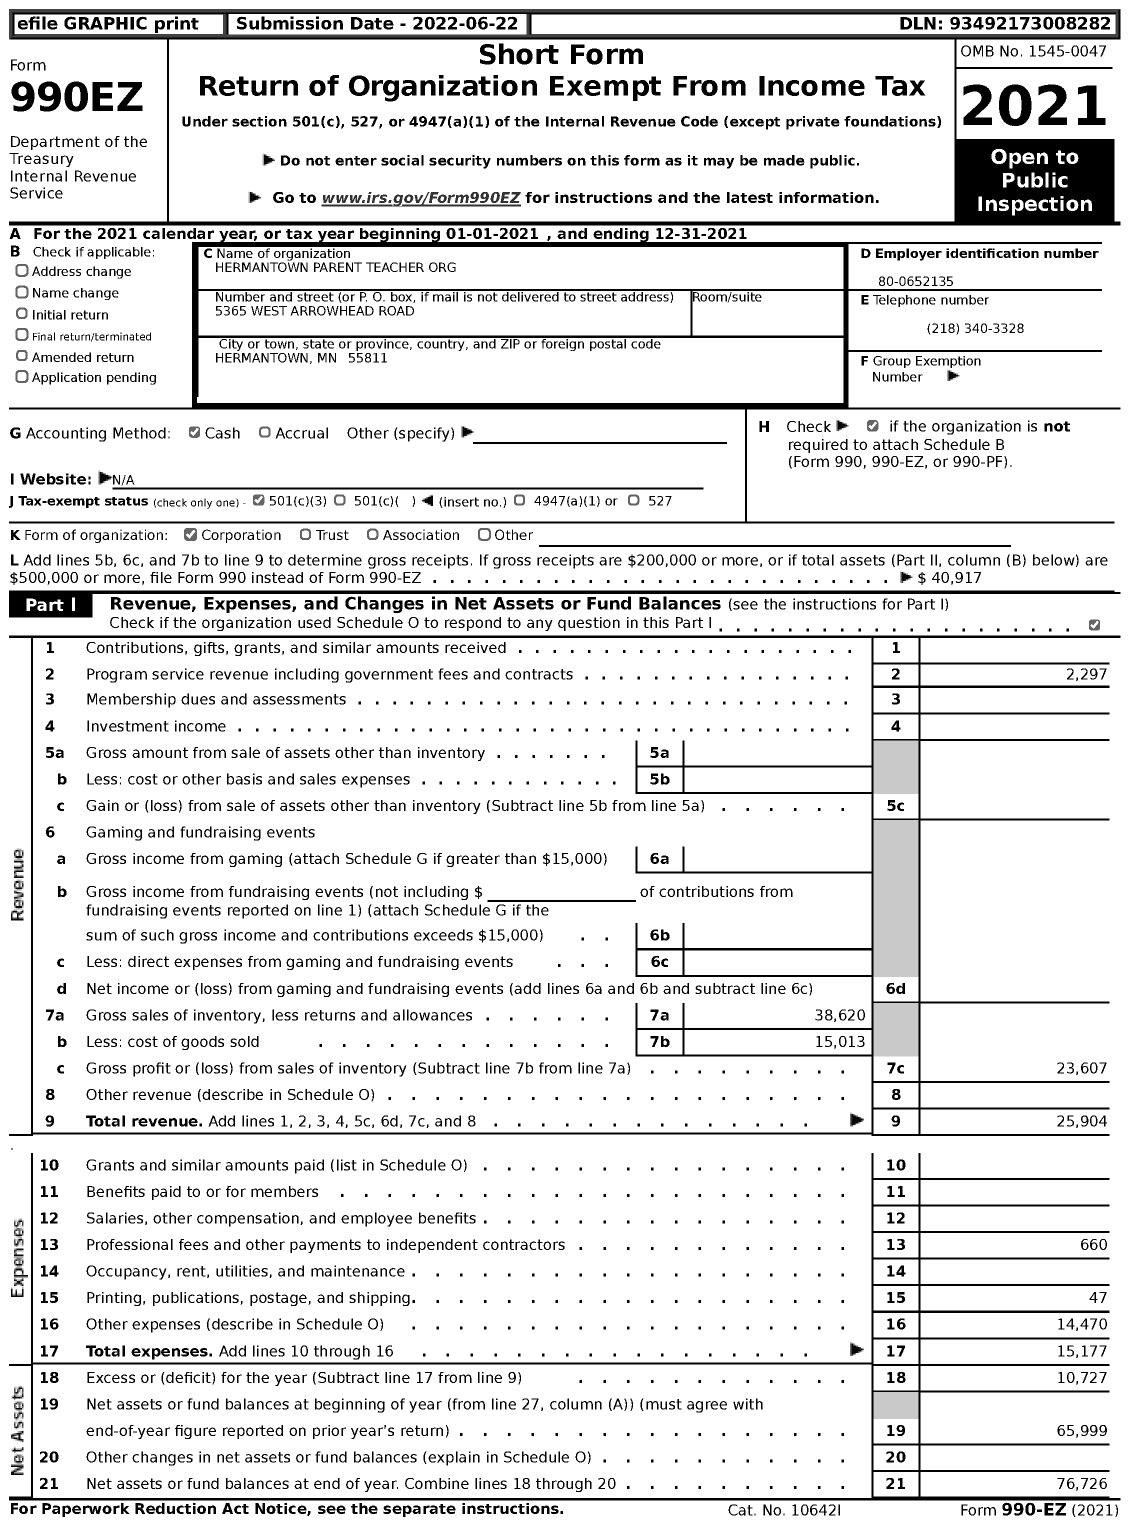 Image of first page of 2021 Form 990EZ for Hermantown Parent Teacher Org